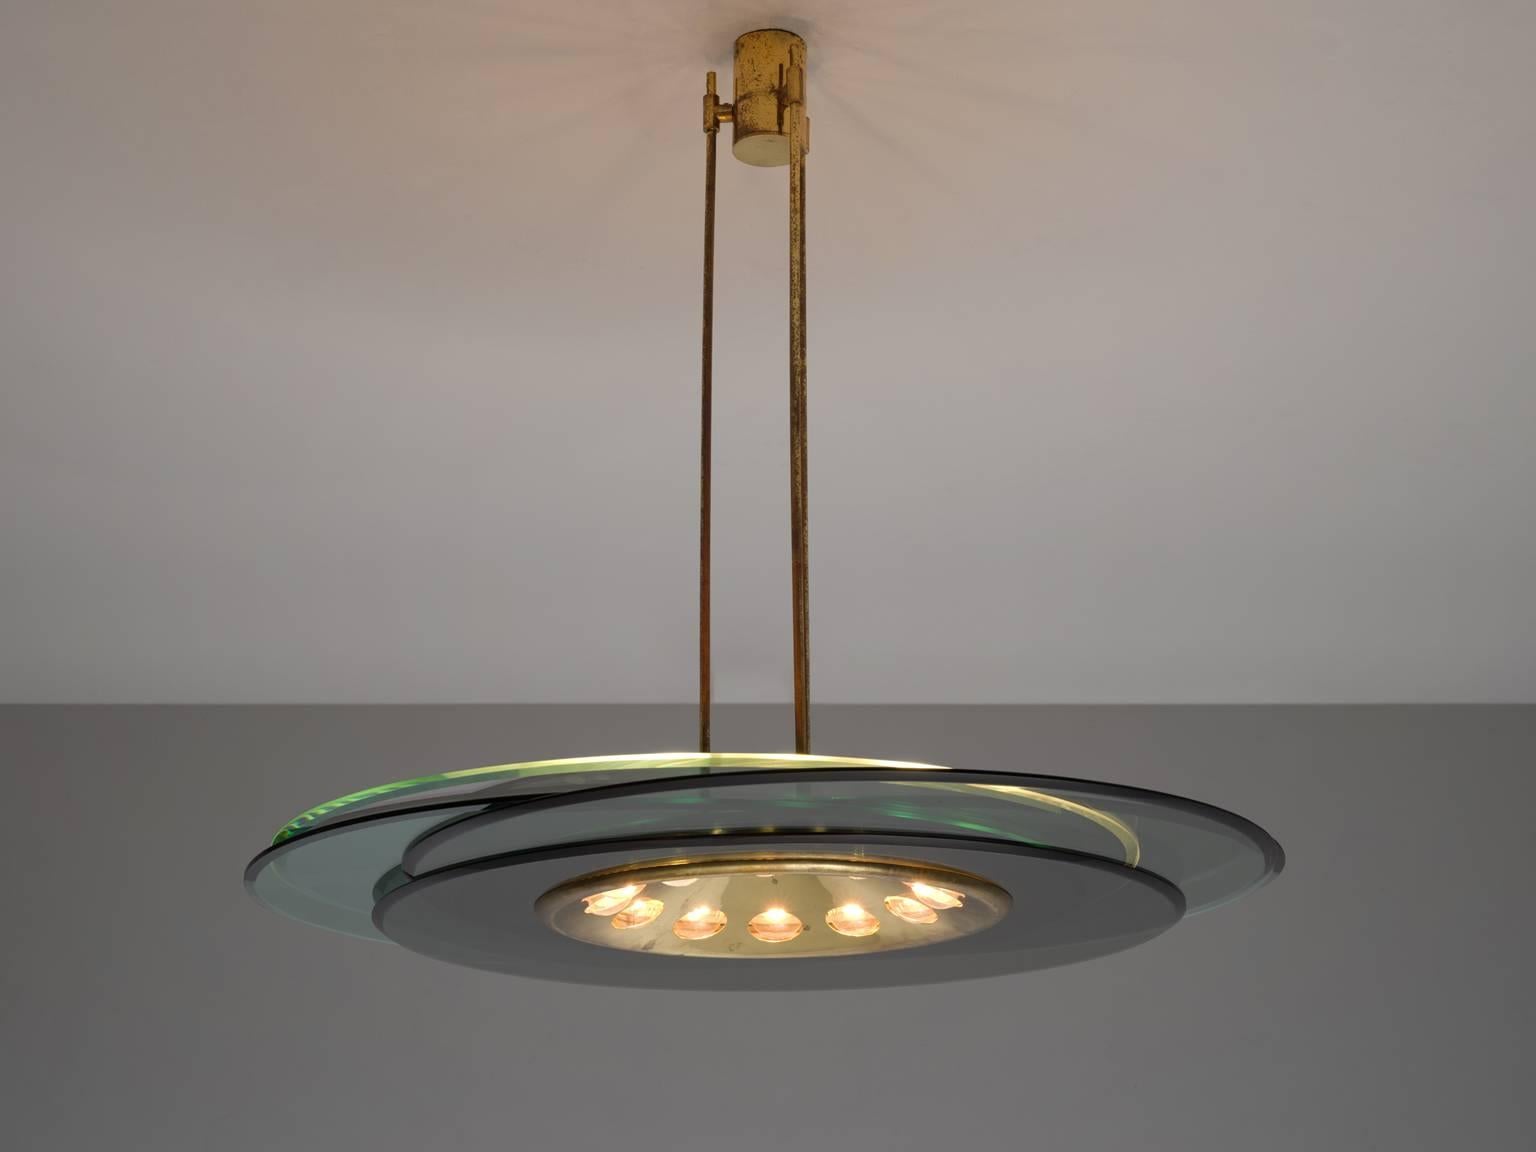 Chandelier in brass, metal and glass by Max Ingrand for Fontana Arte, Italy, circa 1955.

Unique chandelier by Max Ingrand for Fontana Arte. The fixture is made of three brass sterns, which run into a bowl shaped shade with 12 light points. The